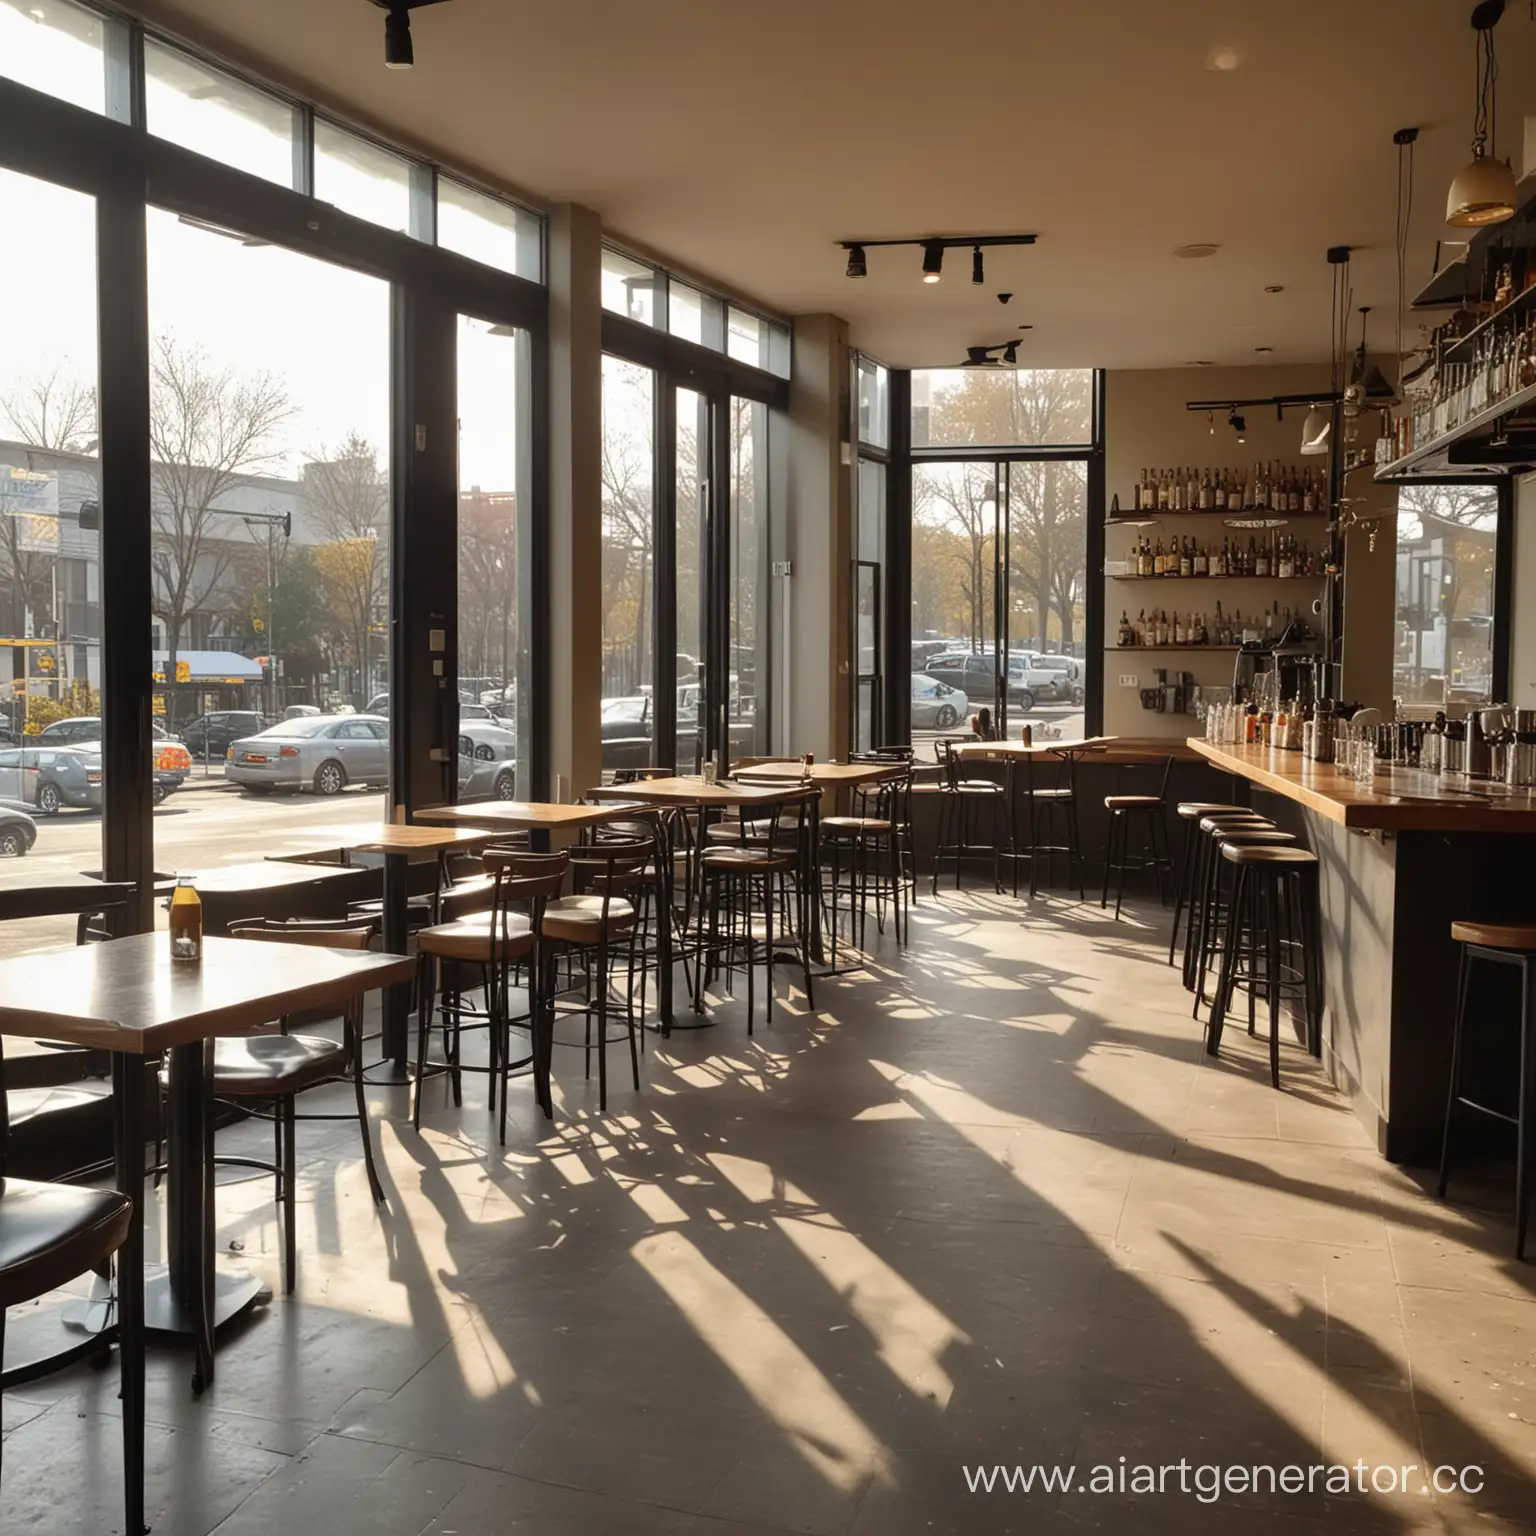 Cafe-Interior-with-Sunlit-Ambiance-and-Bar-Counter